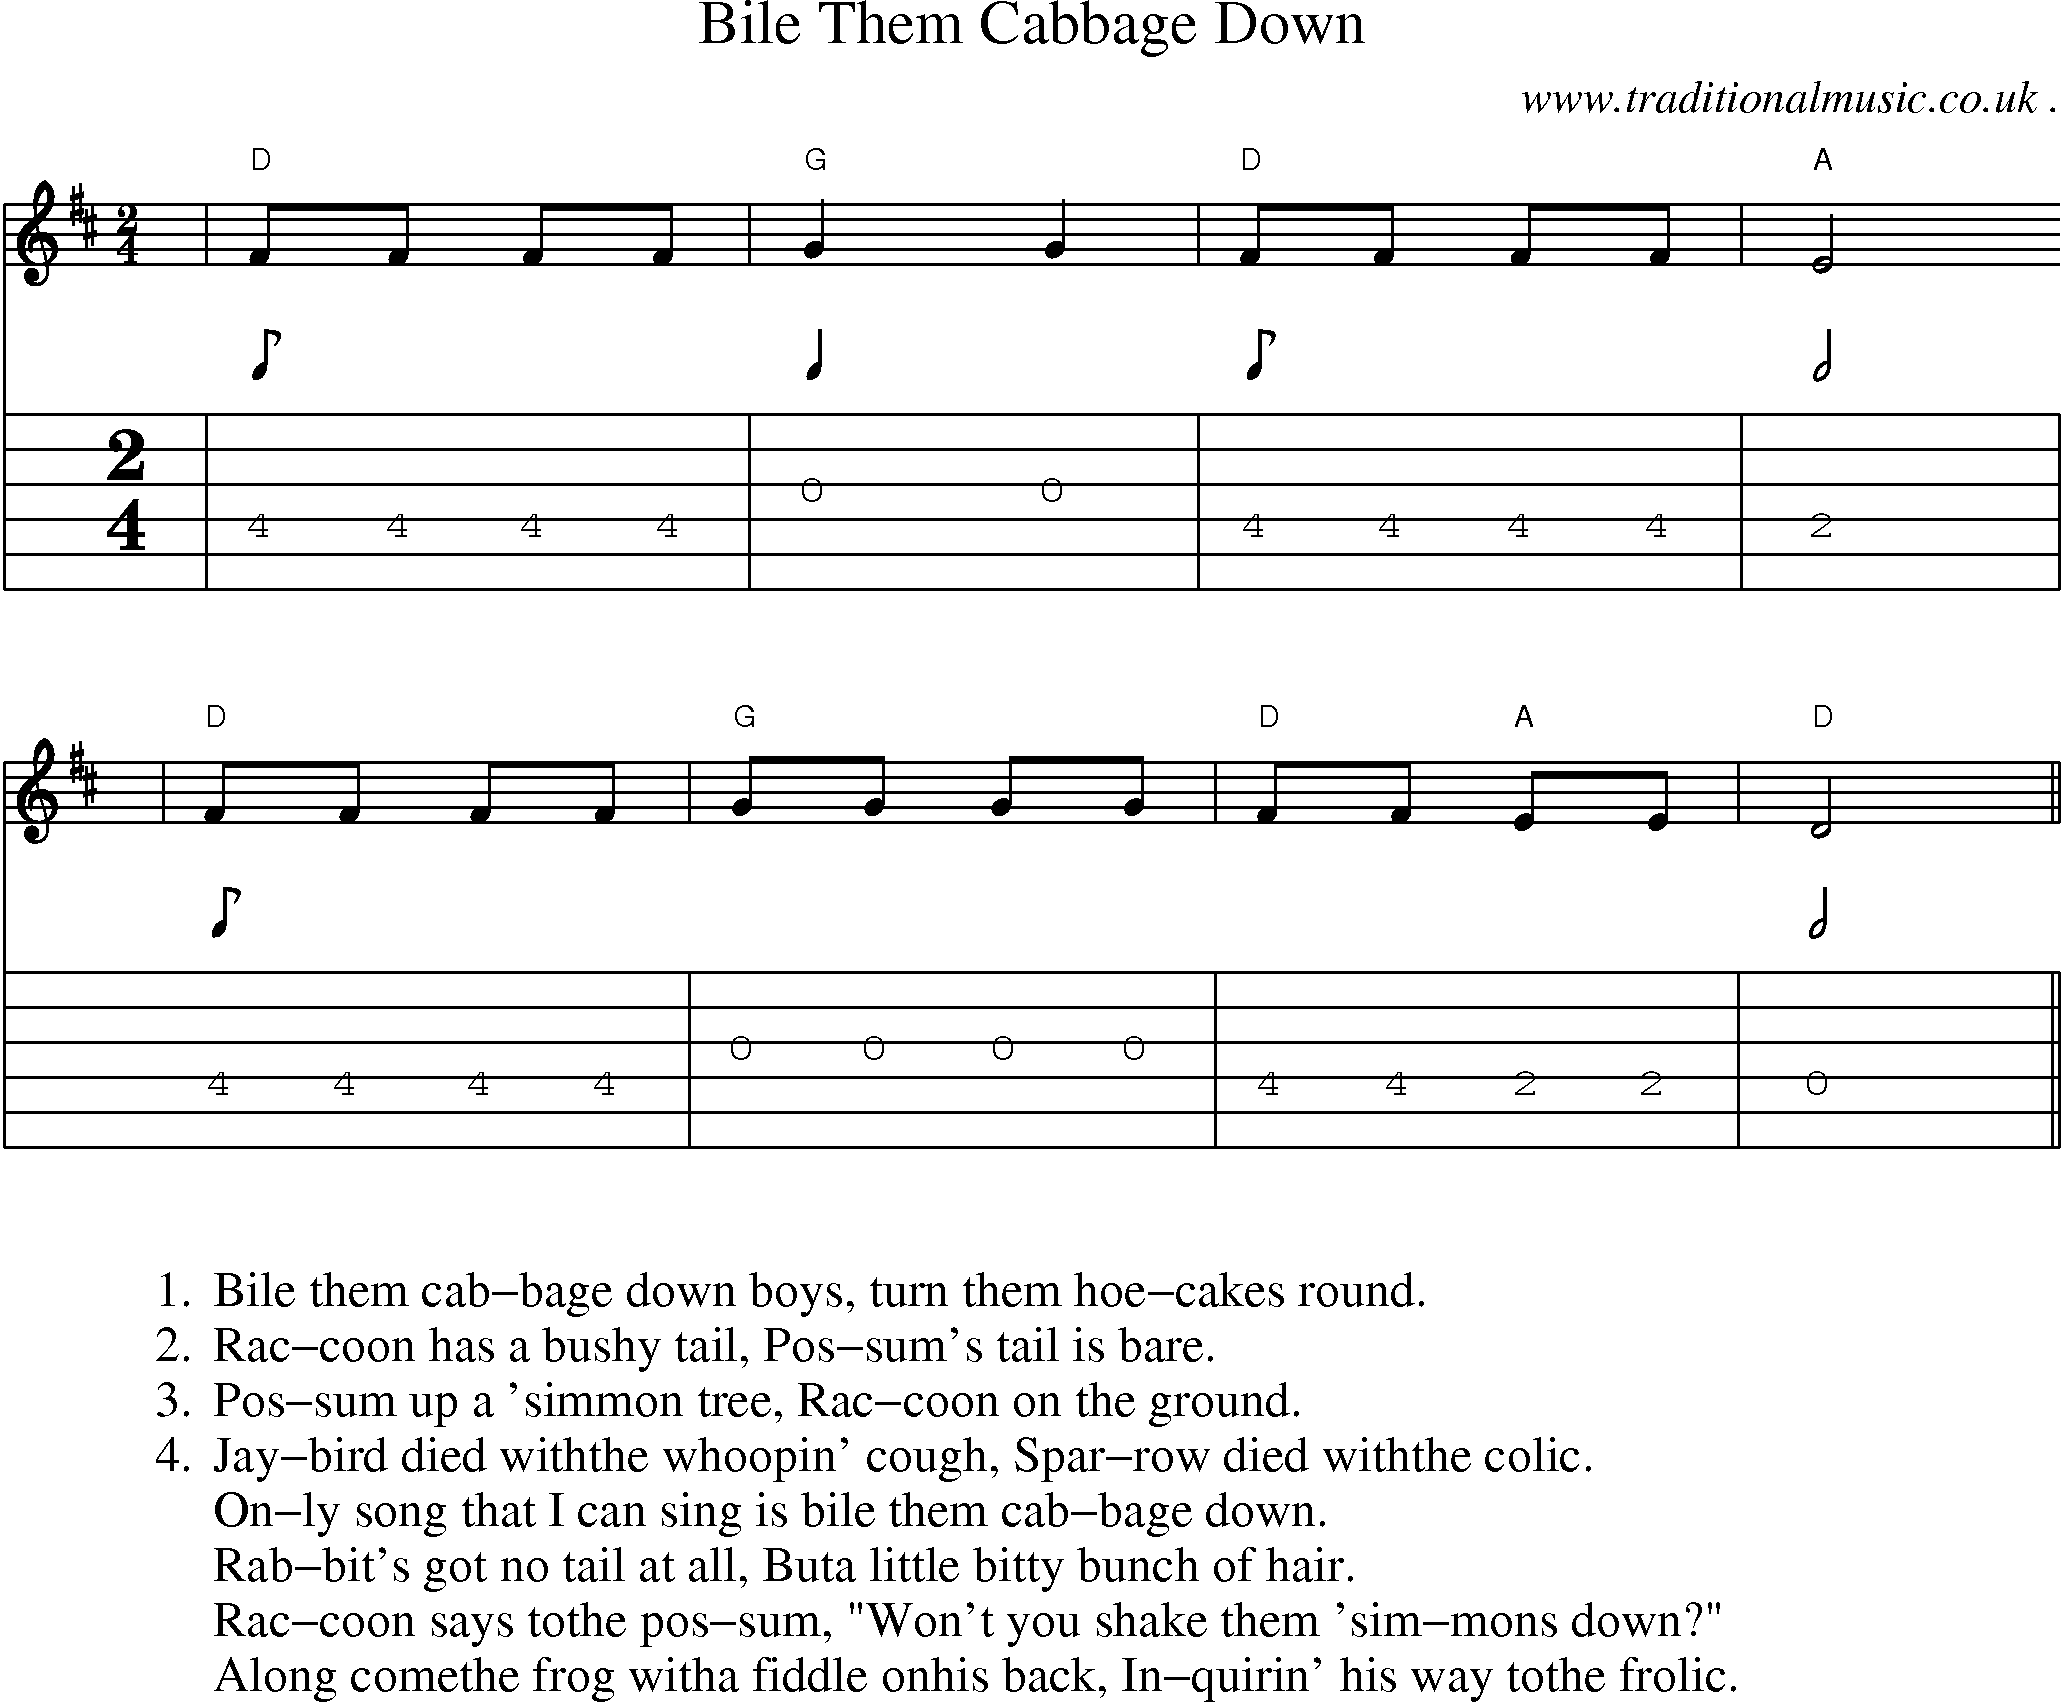 Music Score and Guitar Tabs for Bile Them Cabbage Down